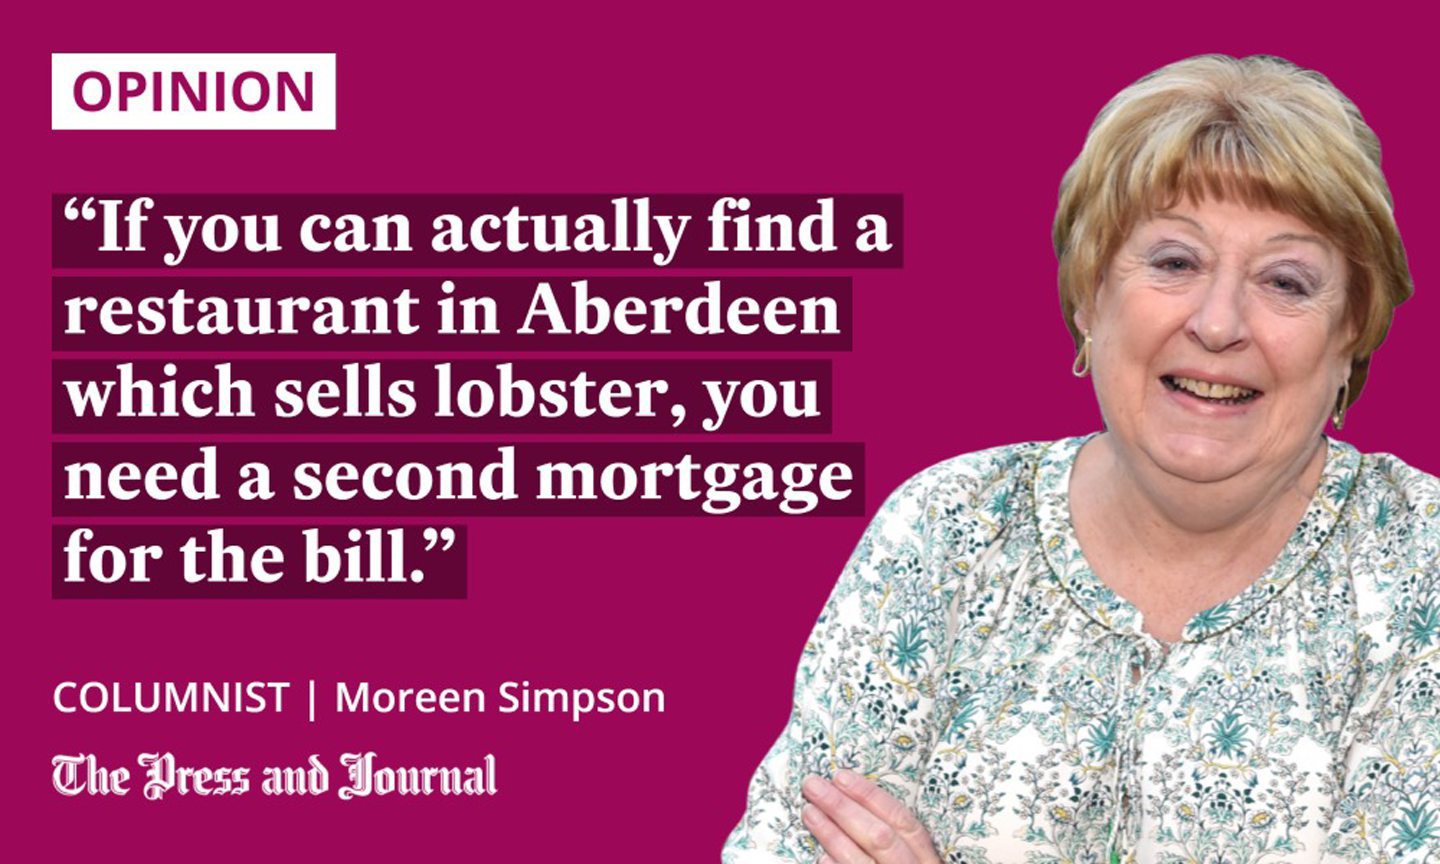 Columnist, Moreen Simpson speaks about lobster: "if you can actually find a restaurant in Aberdeen which sells them, you need a second mortgage for the bill."